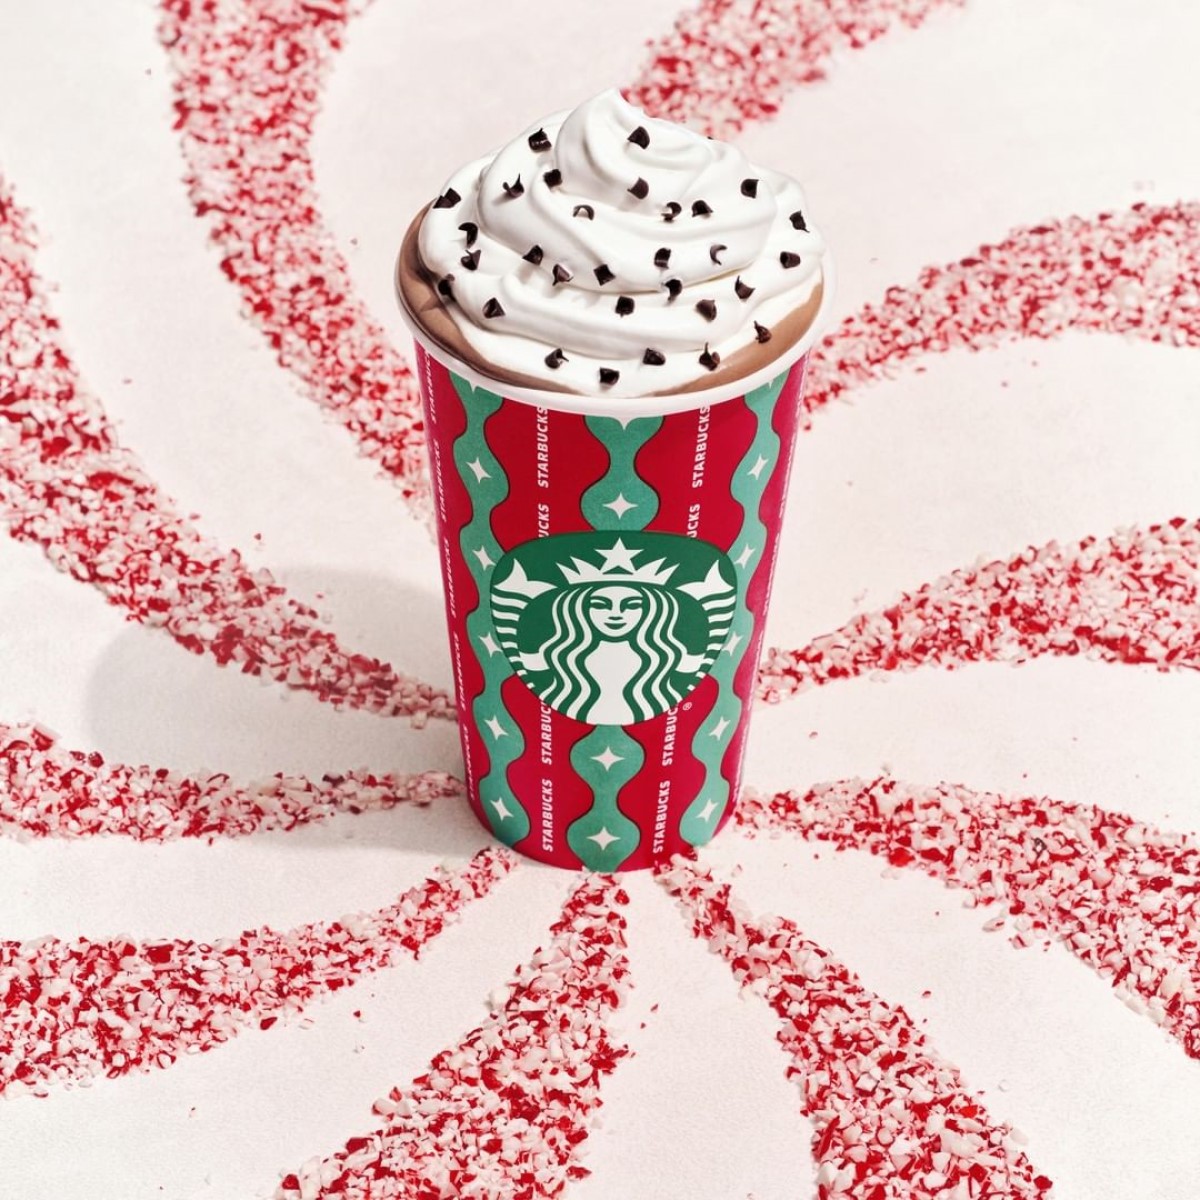 starbucks peppermint mocha in red holiday cup topped with java chips